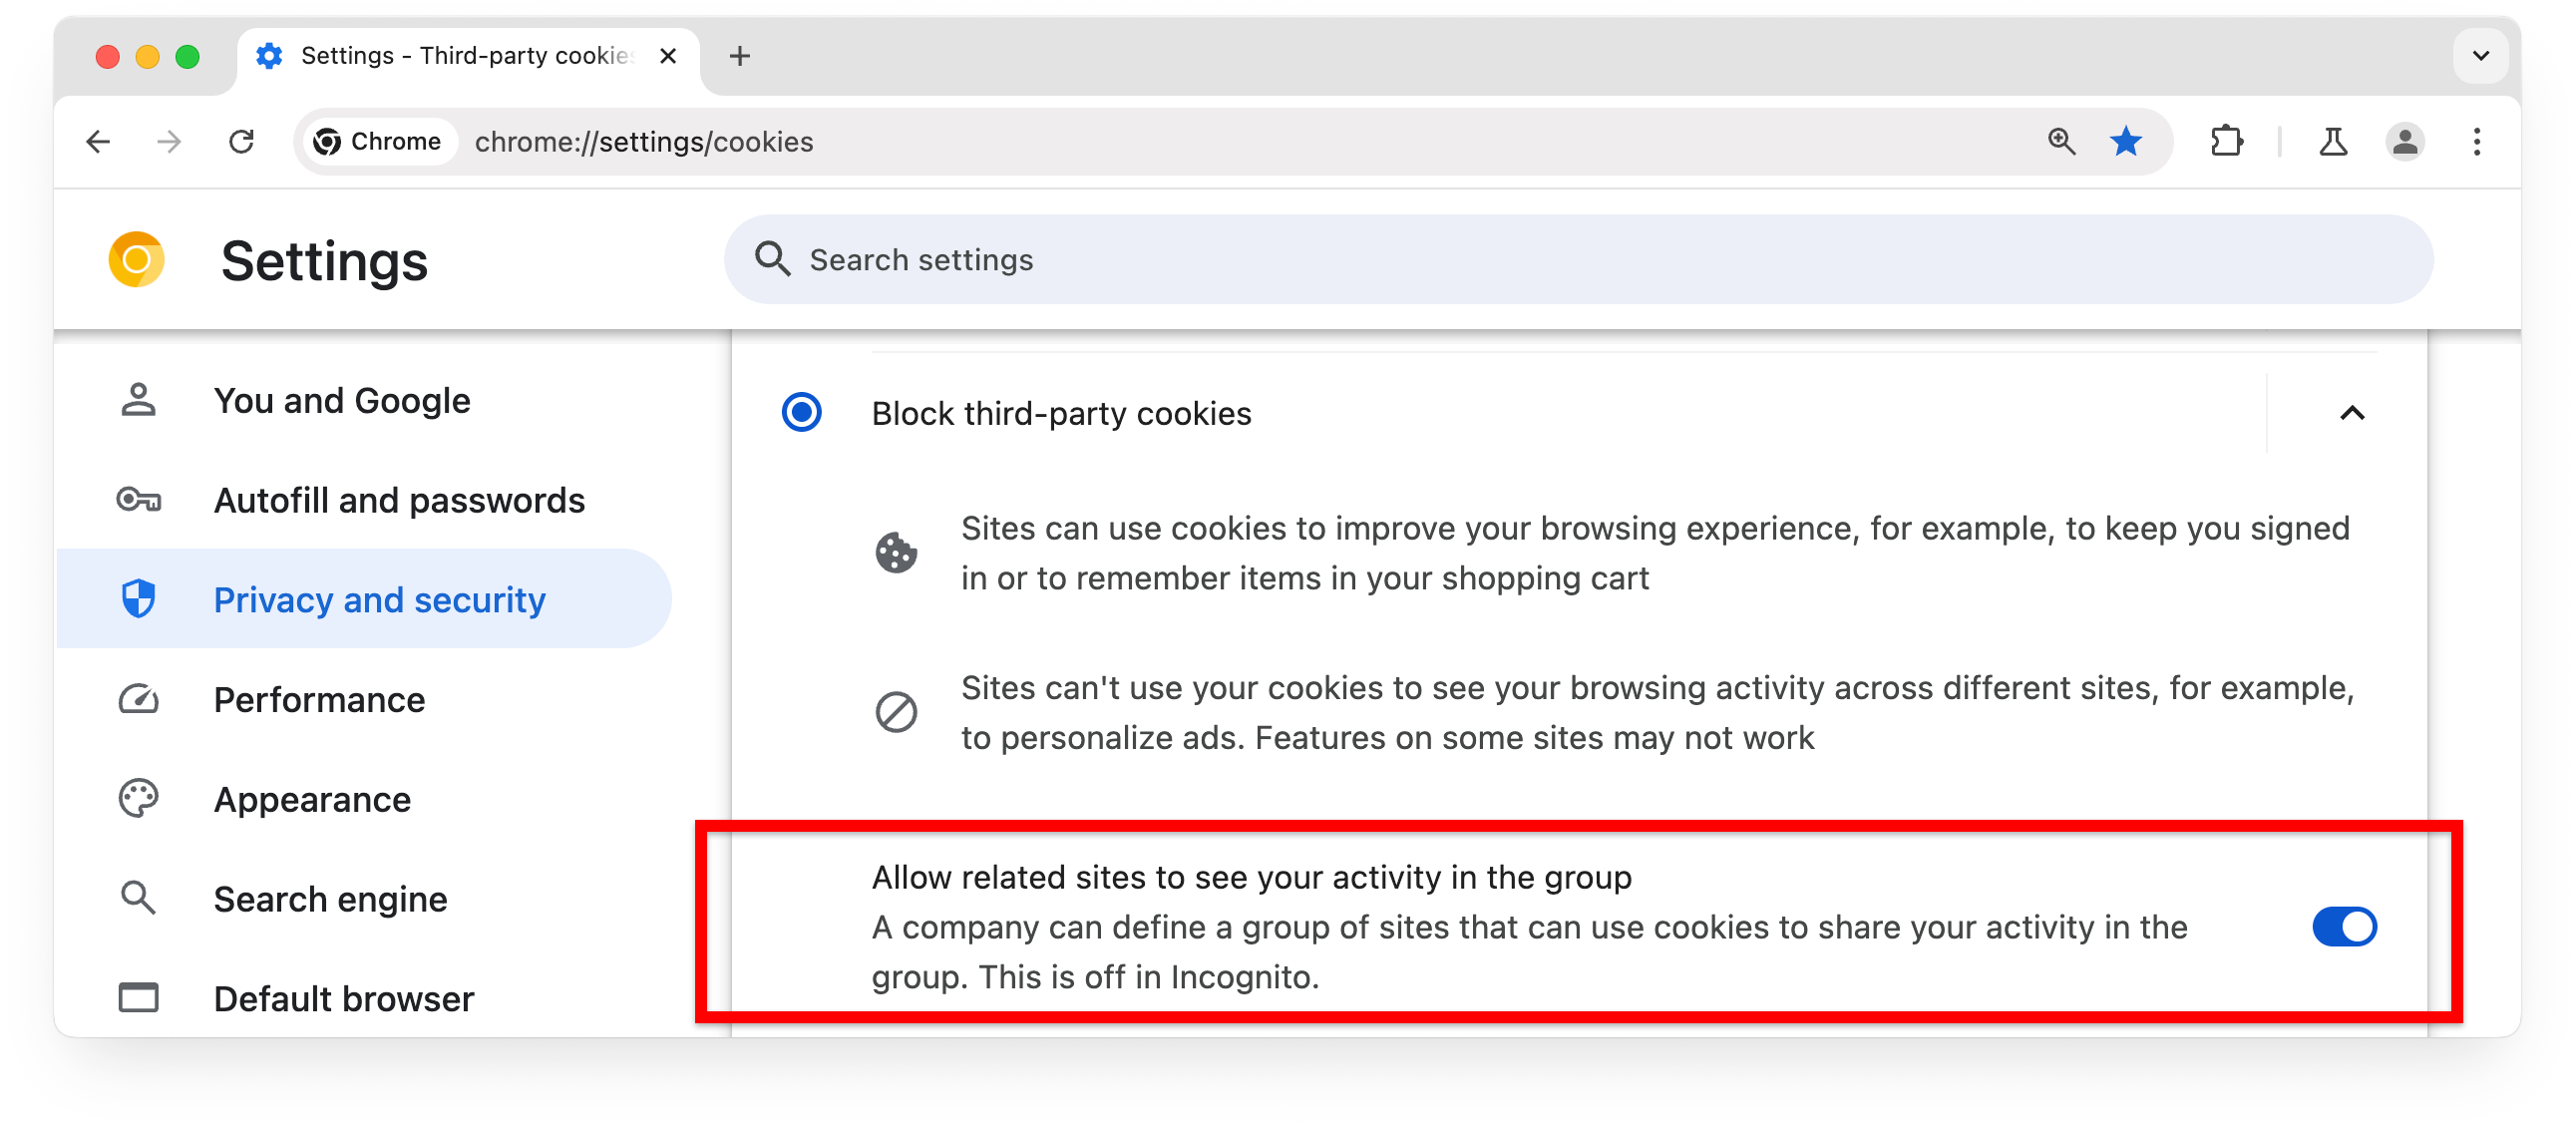 chrome://settings, showing how Related Website Sets can be allowed if third-party cookies are blocked